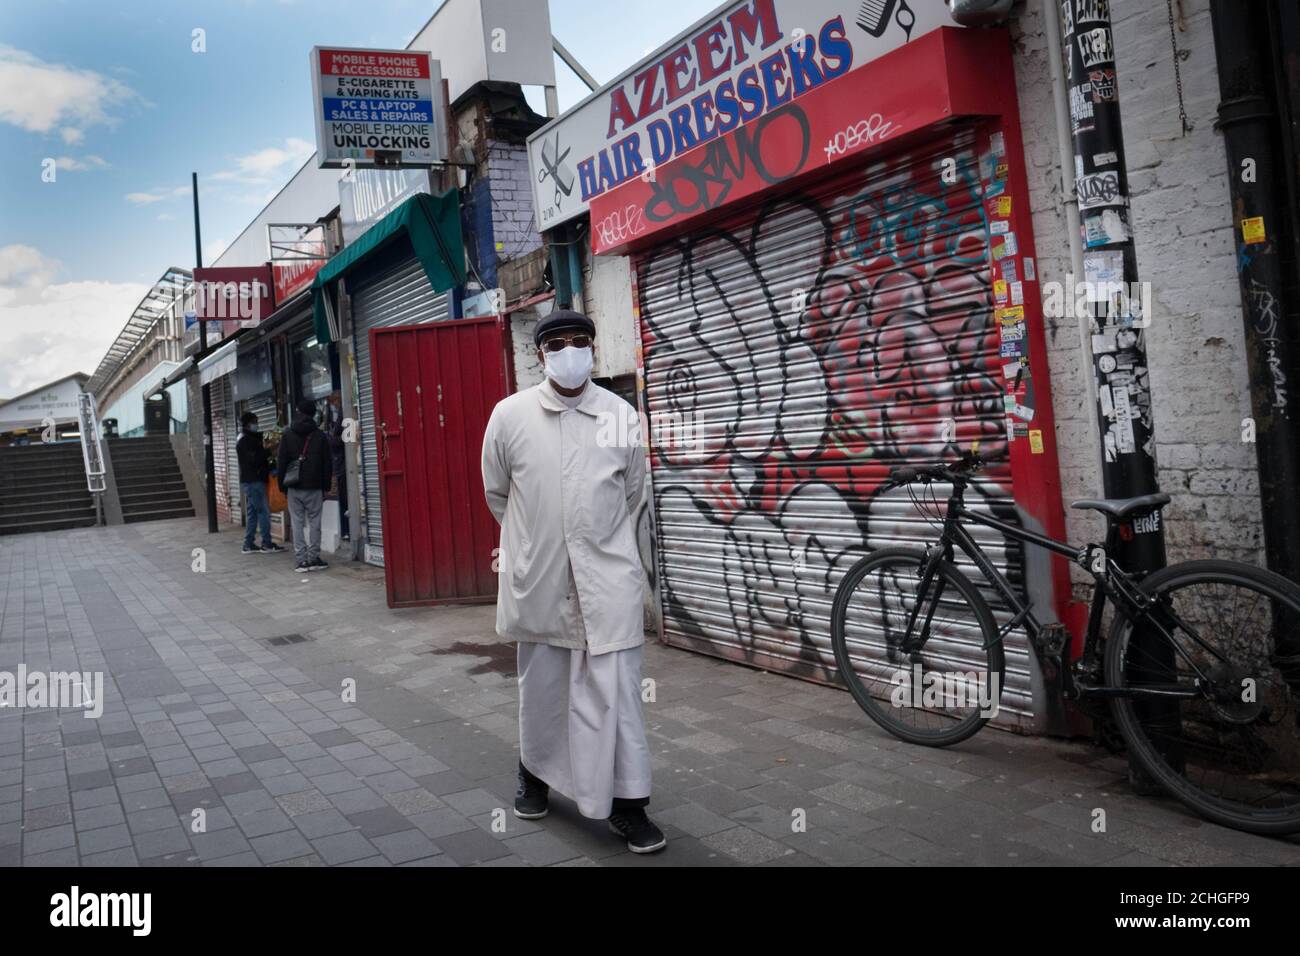 Members of the Islamic community in Whitechapel in east London go about their daily business during the holy month of Ramadan as the UK continues in lockdown to help curb the spread of the coronavirus. Stock Photo